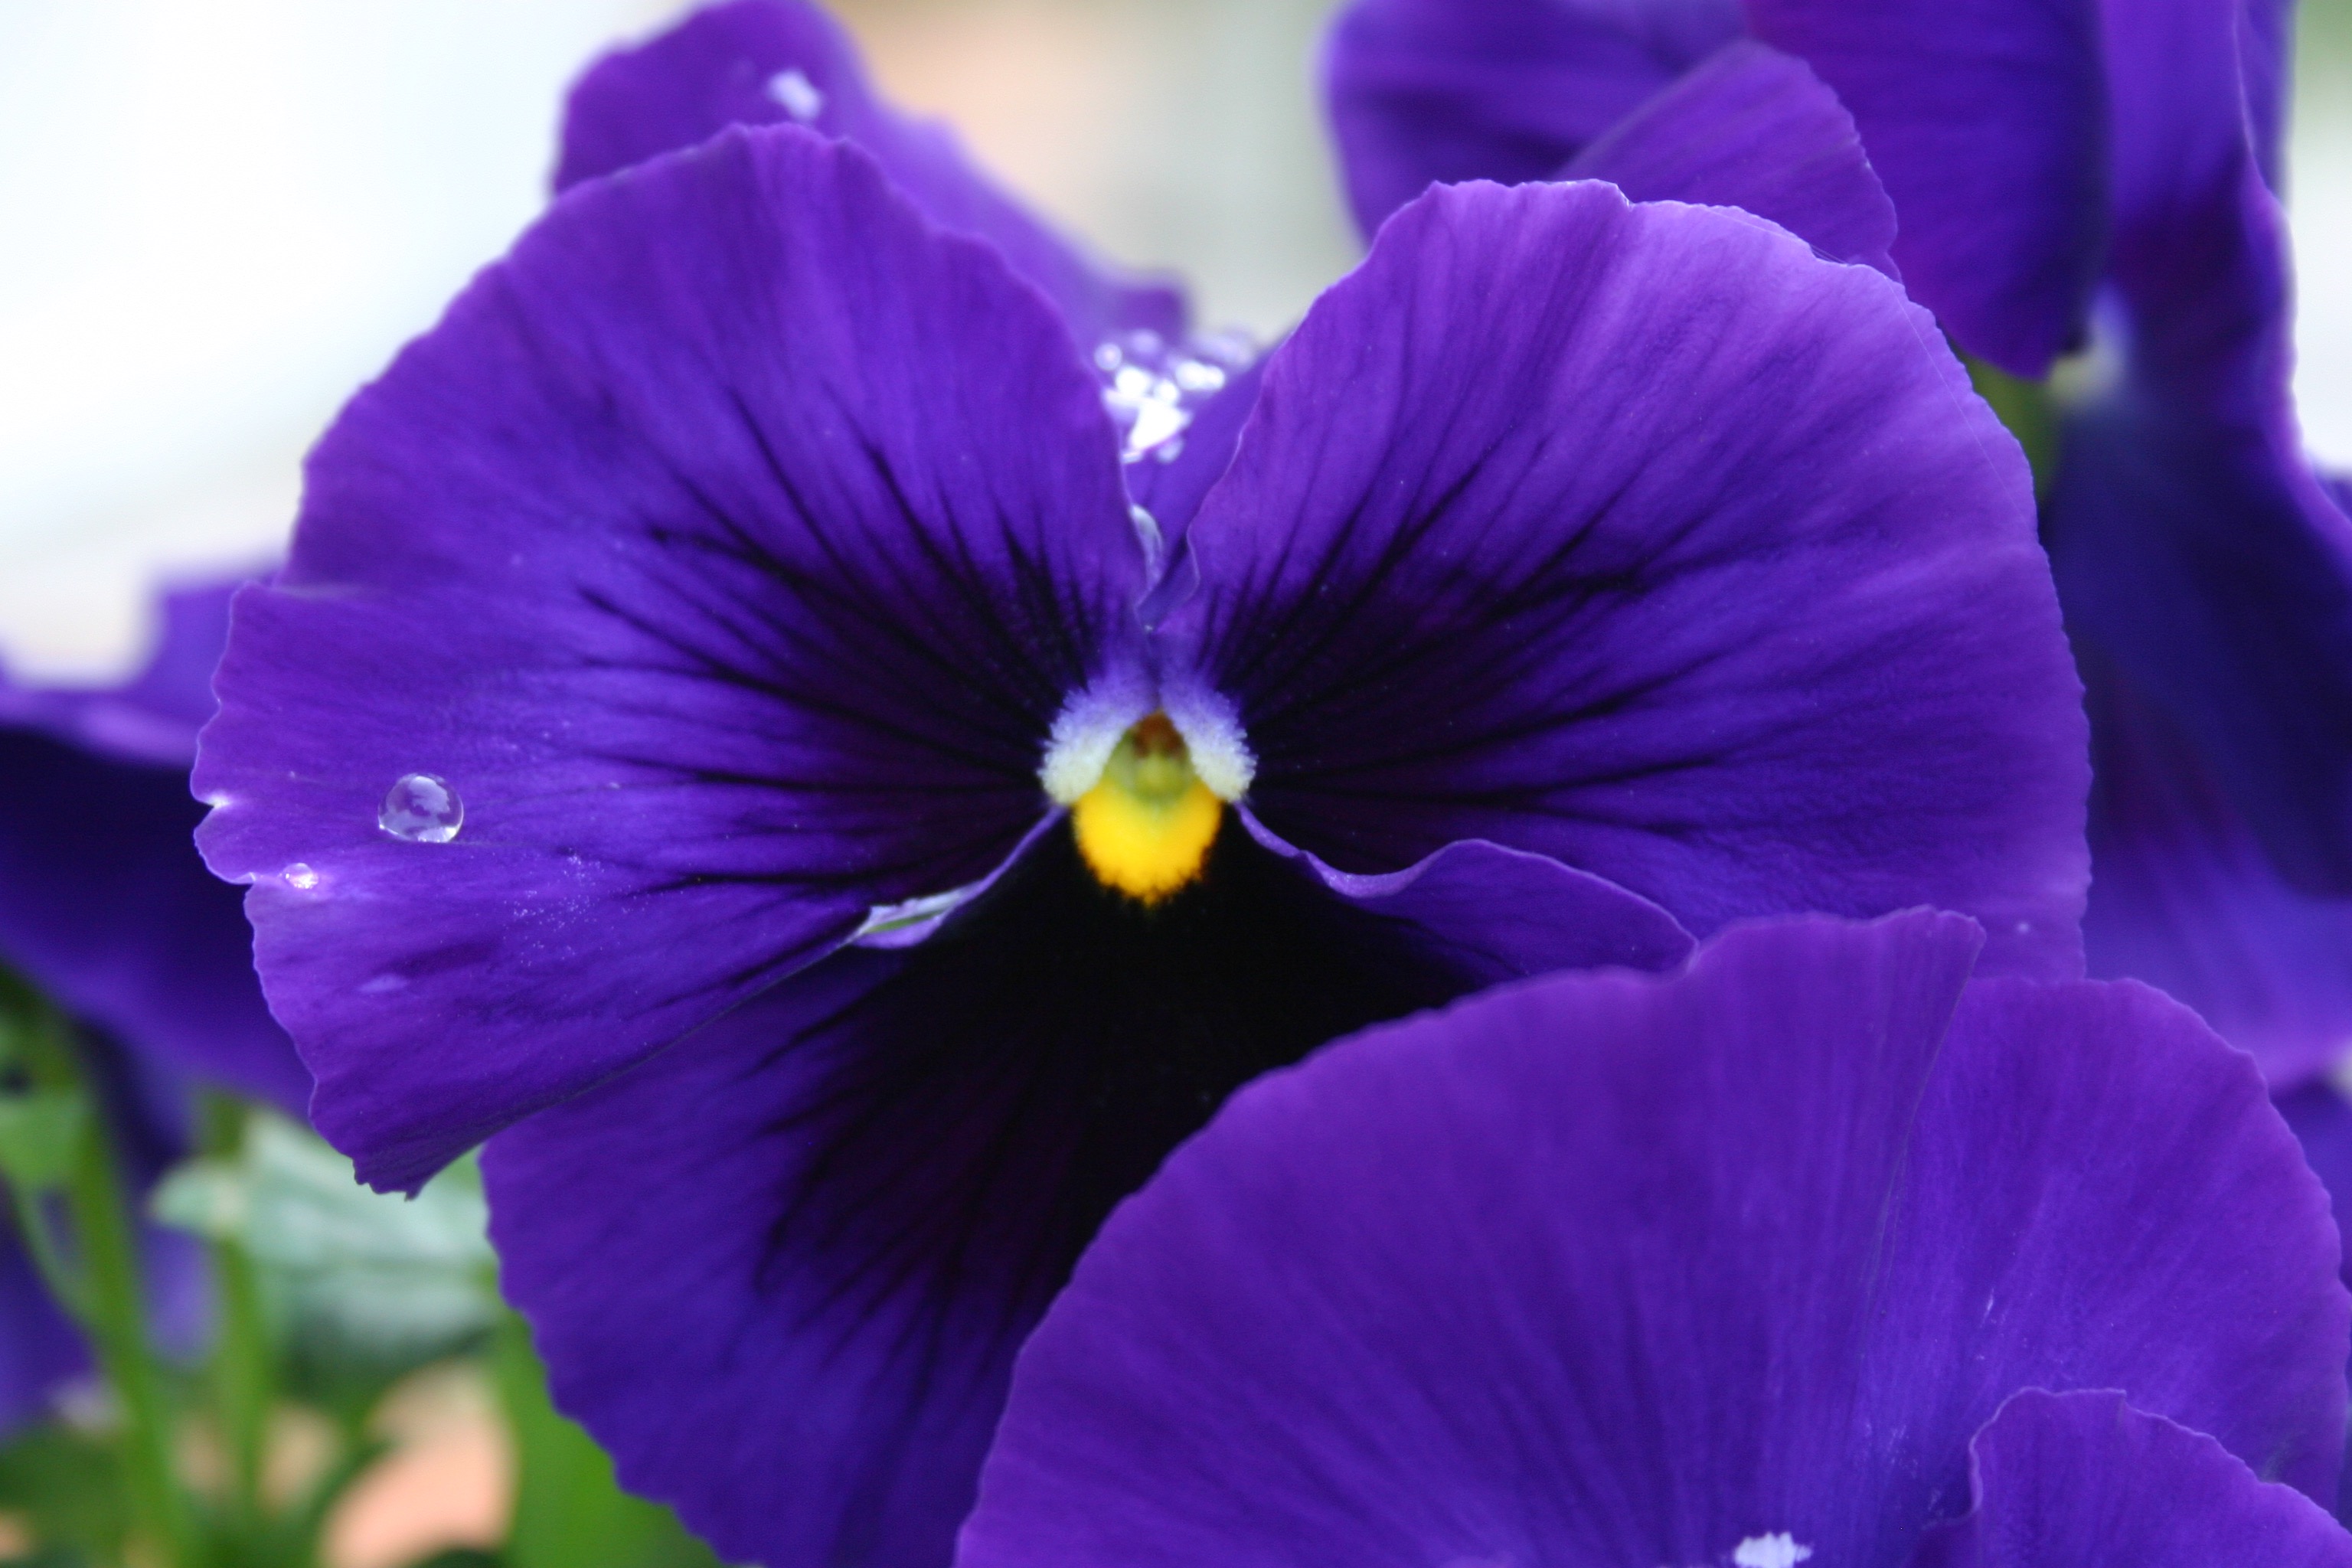 Purple and yellow pansies.